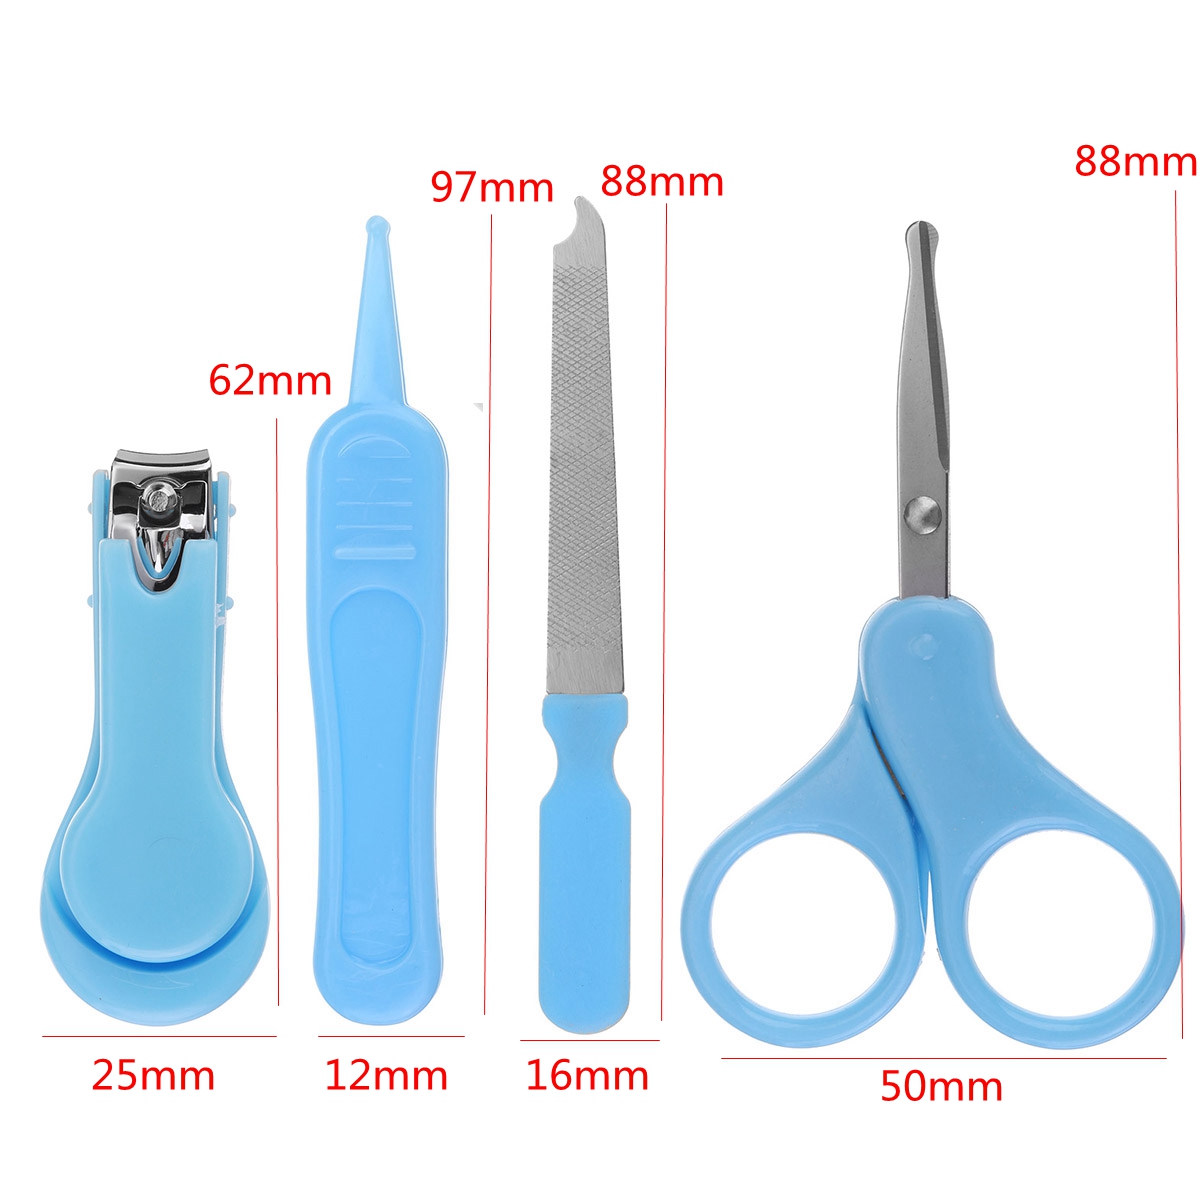 4pcs-Baby-Care-Set-Stainless-Steel-Children-Nail-Clippers-Nail-File-Tools-Set-1791871-8